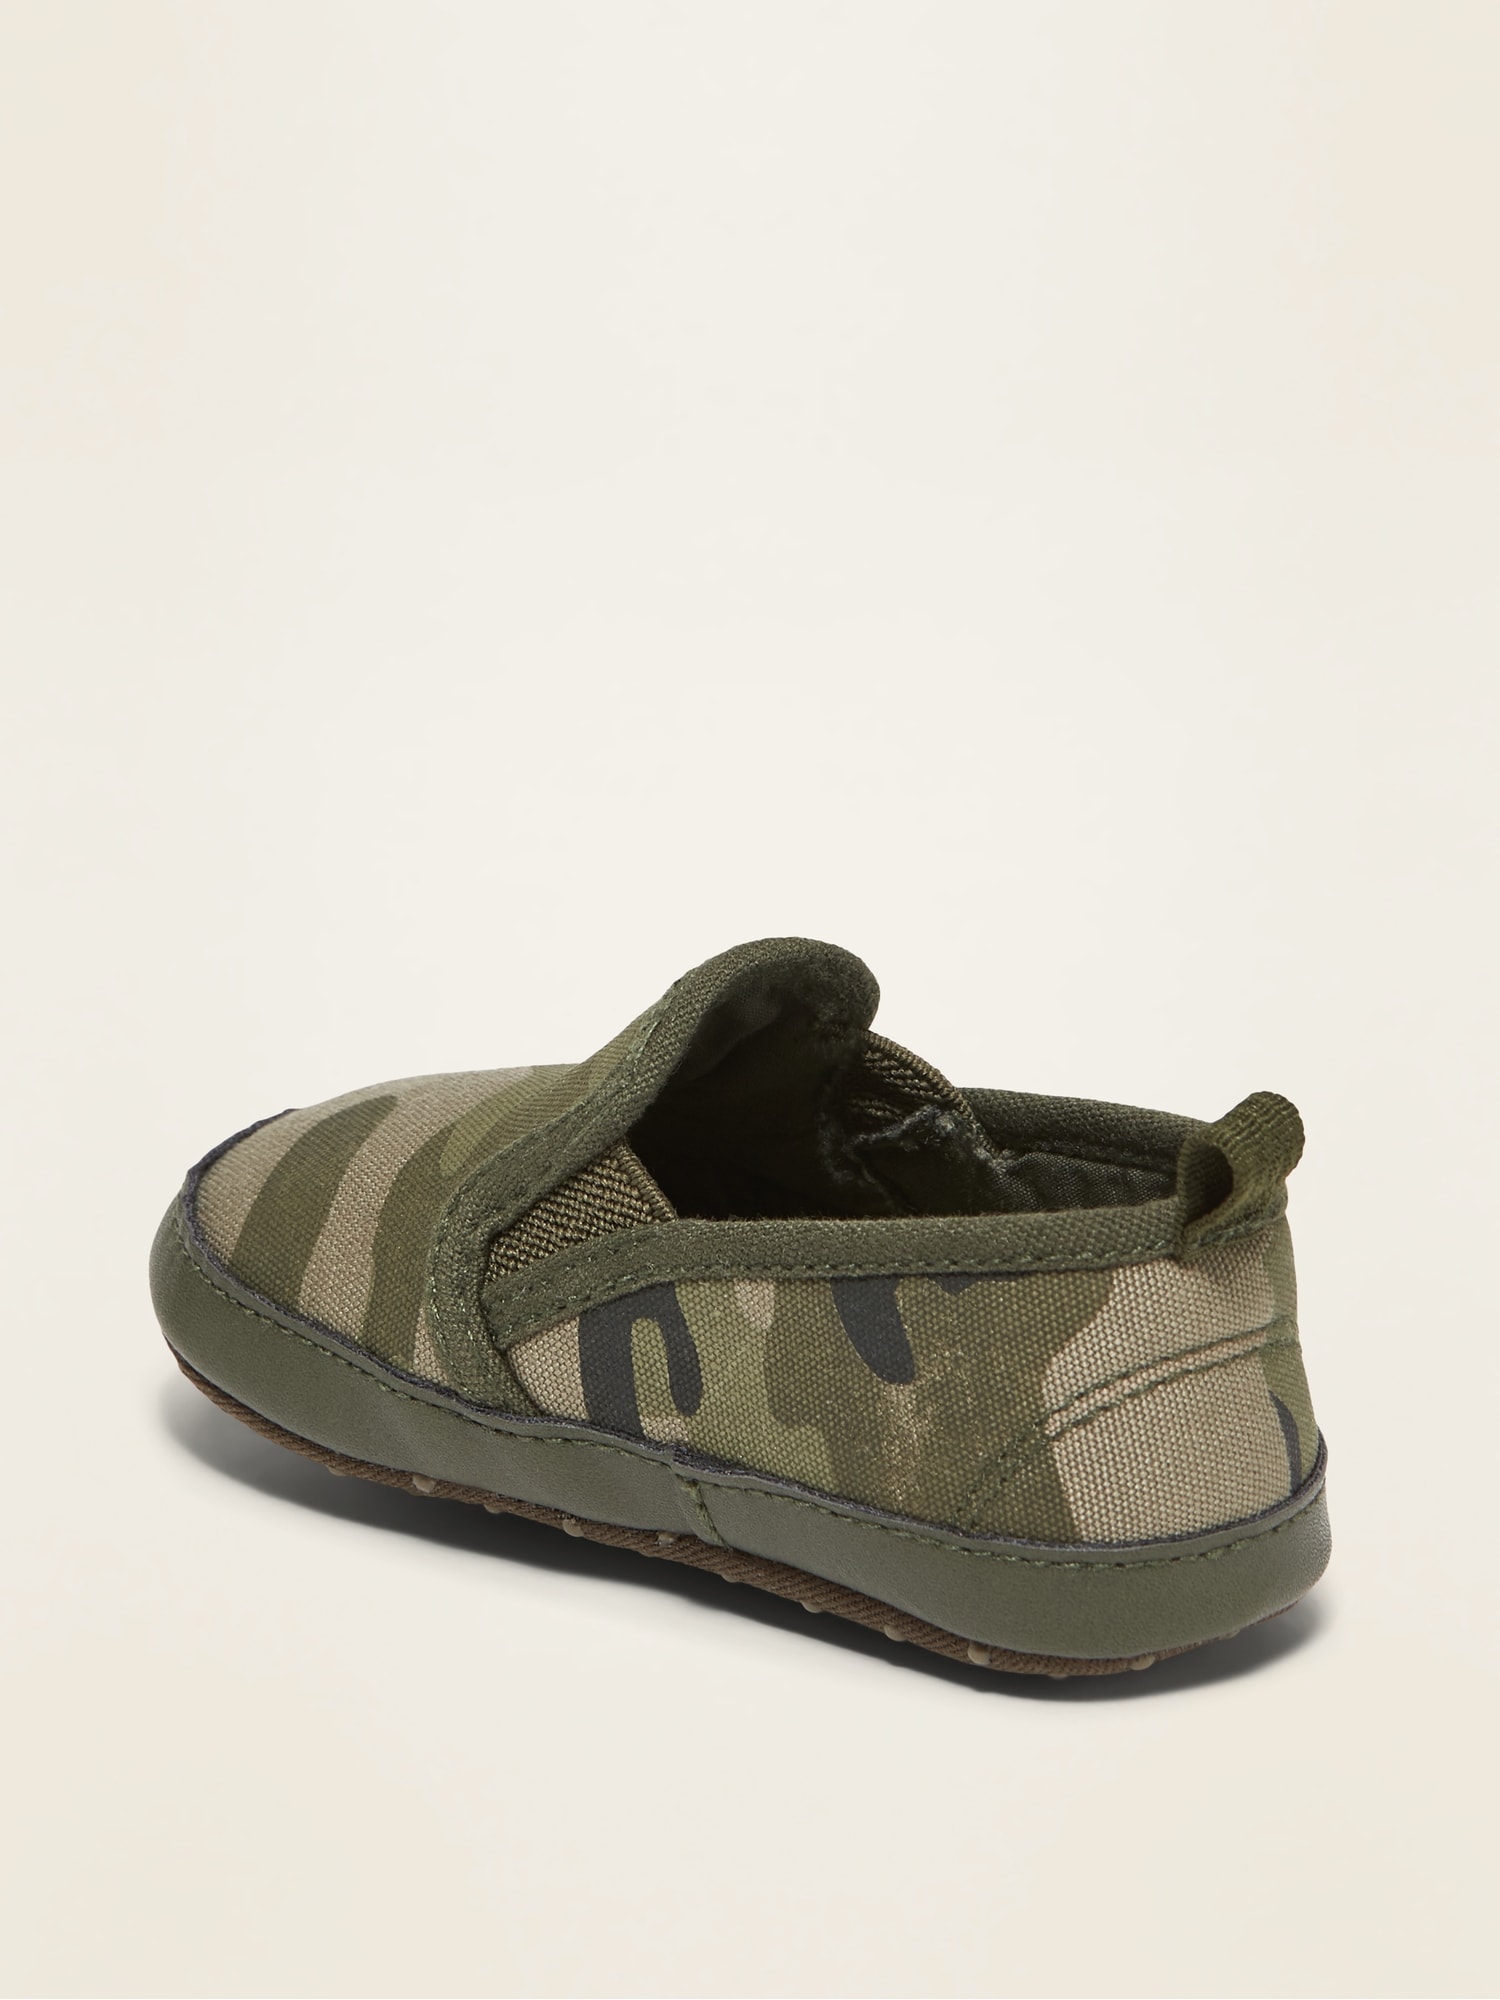 old navy baby shoes